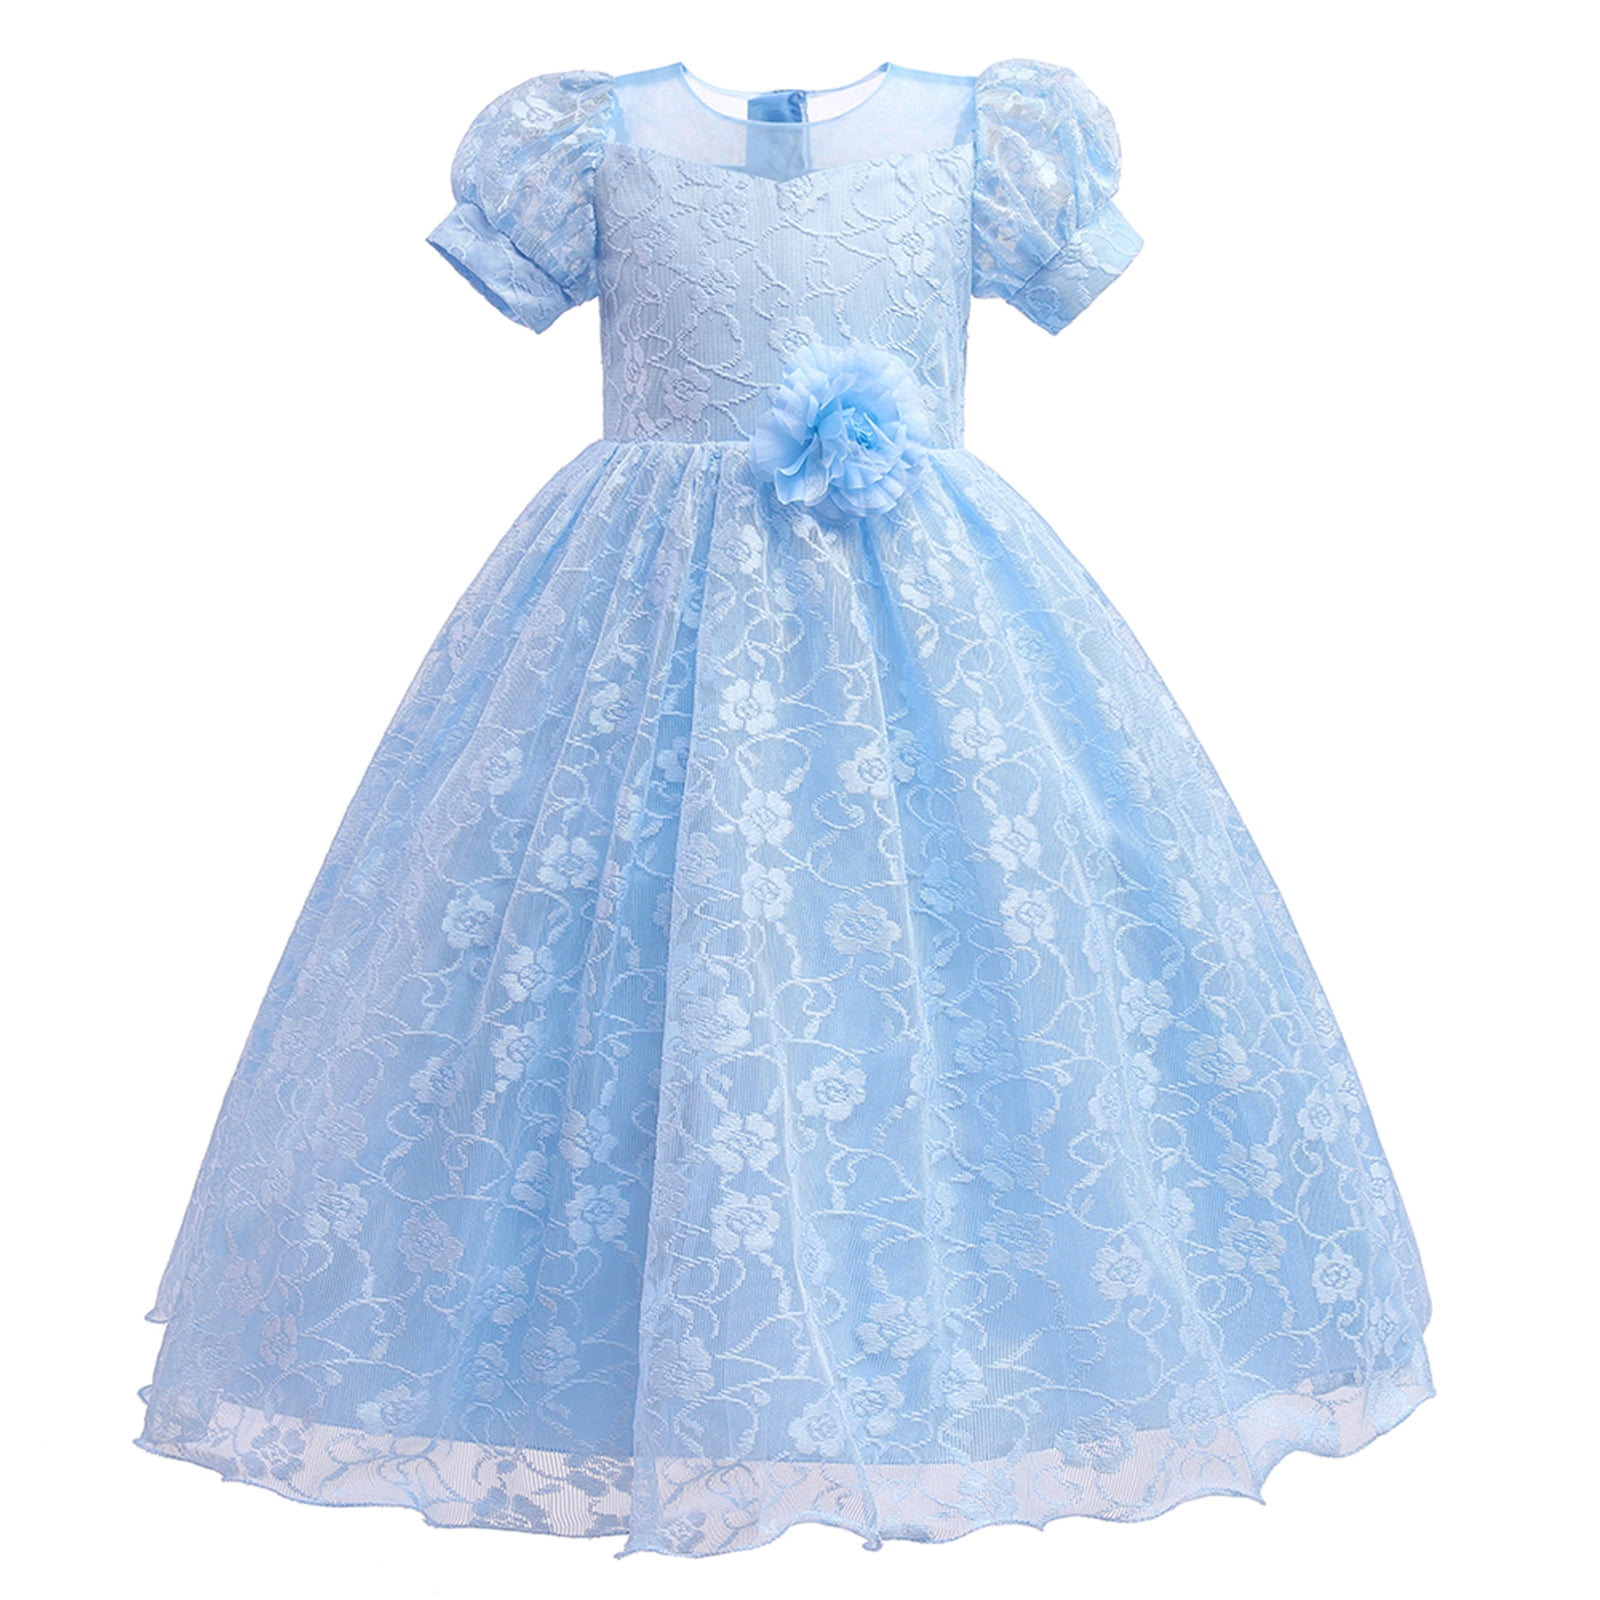 Girls Toddler Kids Princess Dress Sequin Tulle Dress for Wedding Birthday Party 